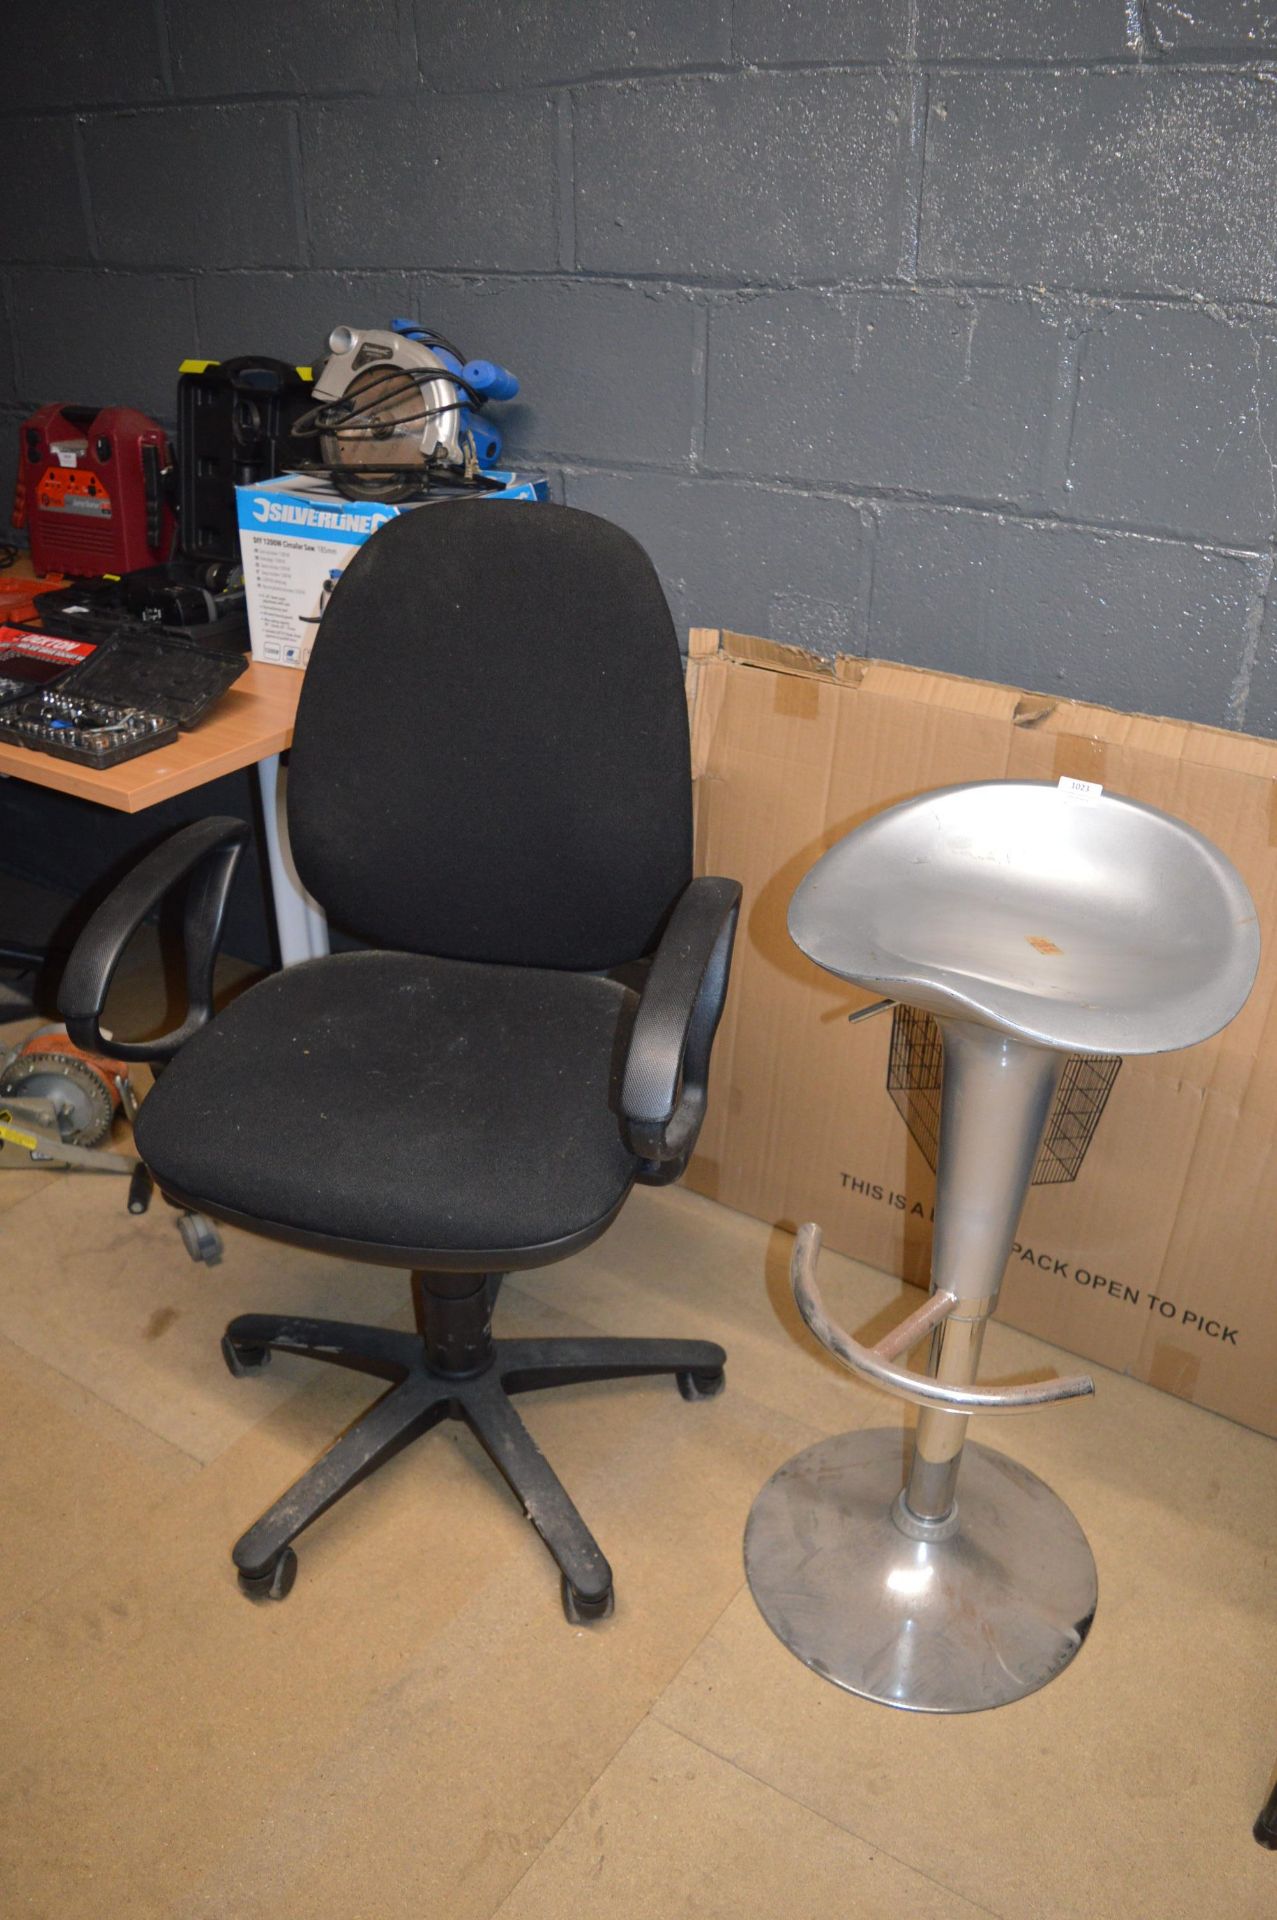 Barstool and an Office Swivel Chair